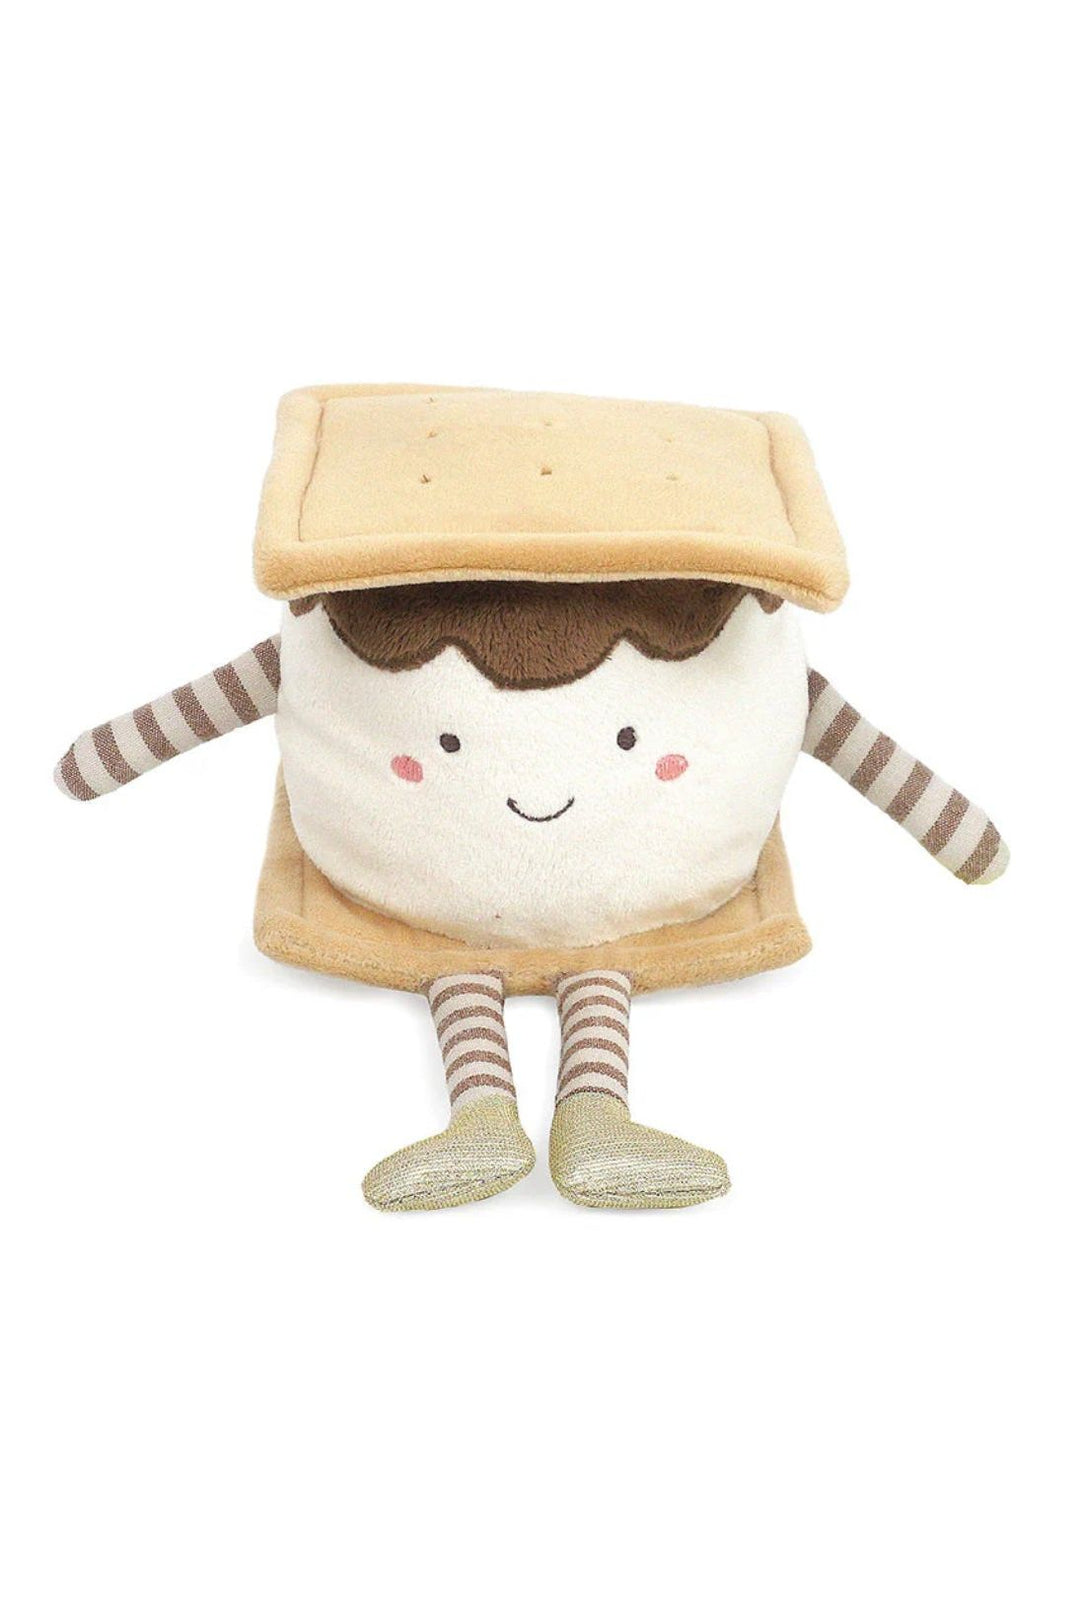 Meet Moe S’mores- Your Child’s New Best Summer Buddy!